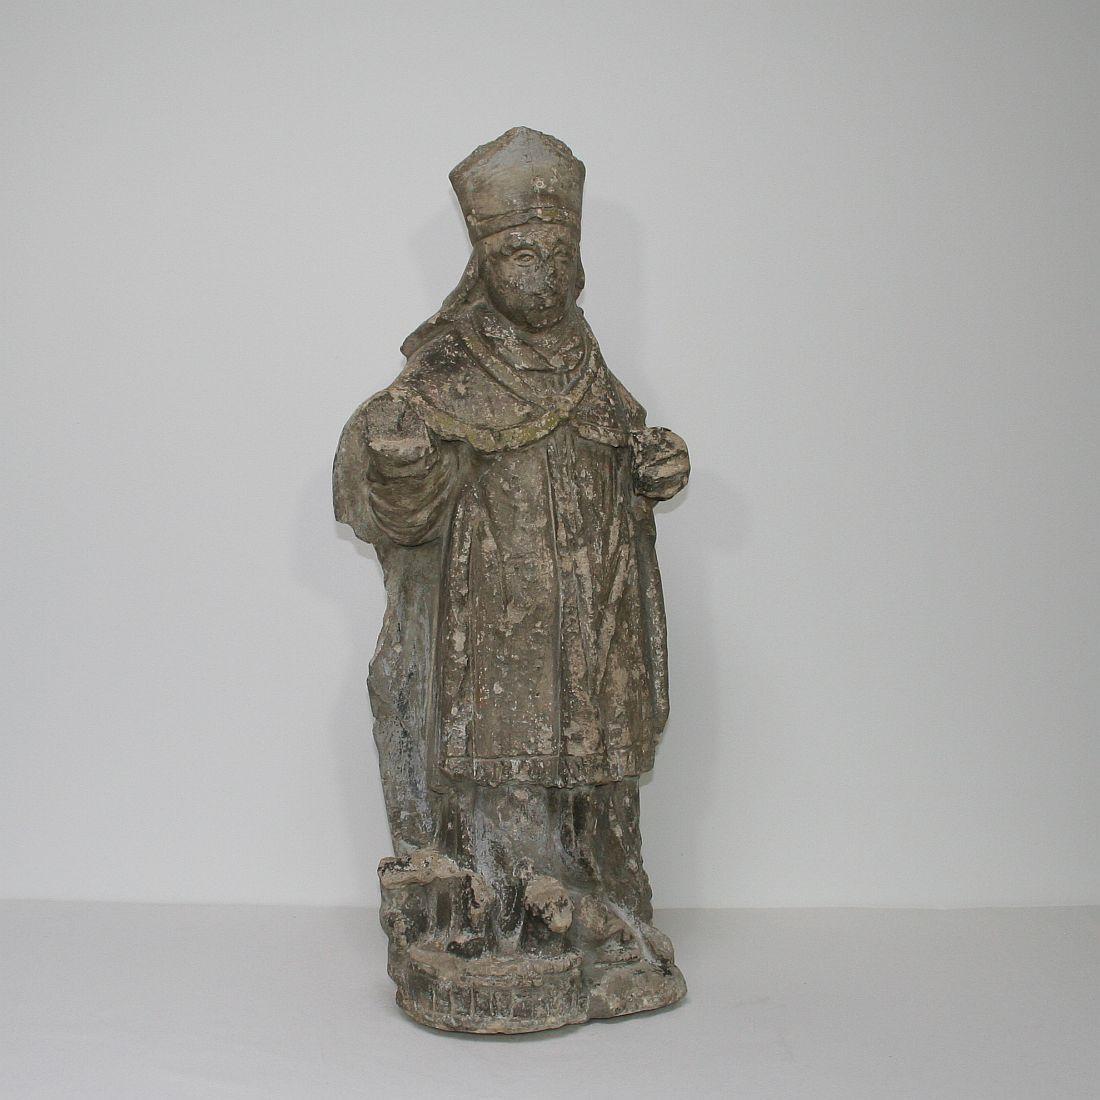 Hand-Carved French, 17th Century Carved Stone Statue of Saint Nicholas